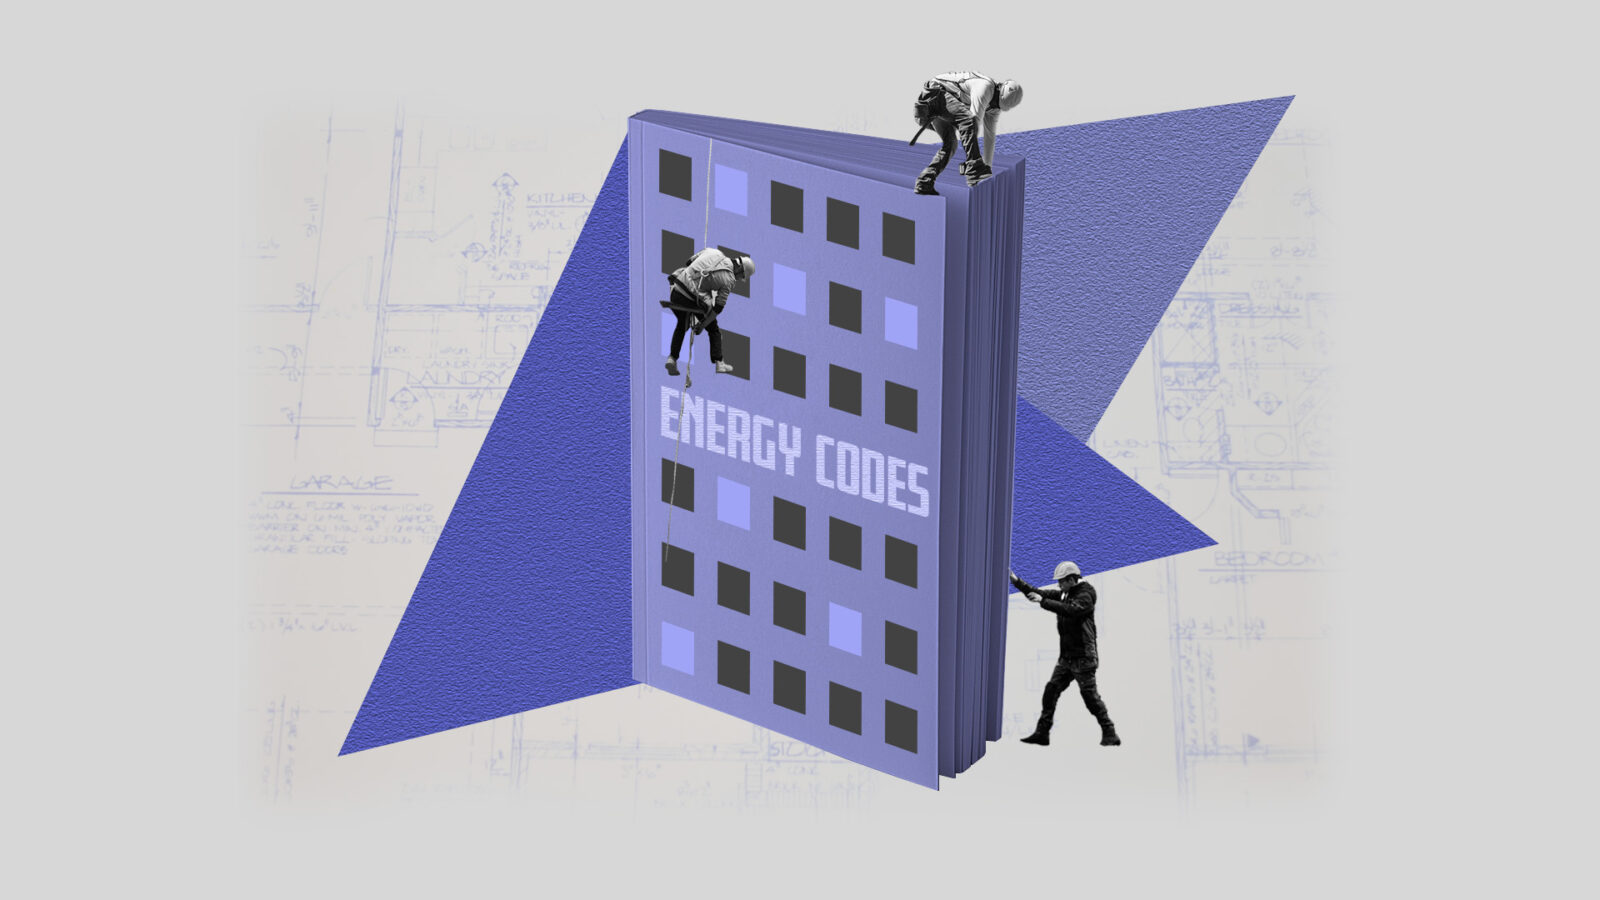 A book with windows on it that says "energy code" with construction workers hanging off the side.